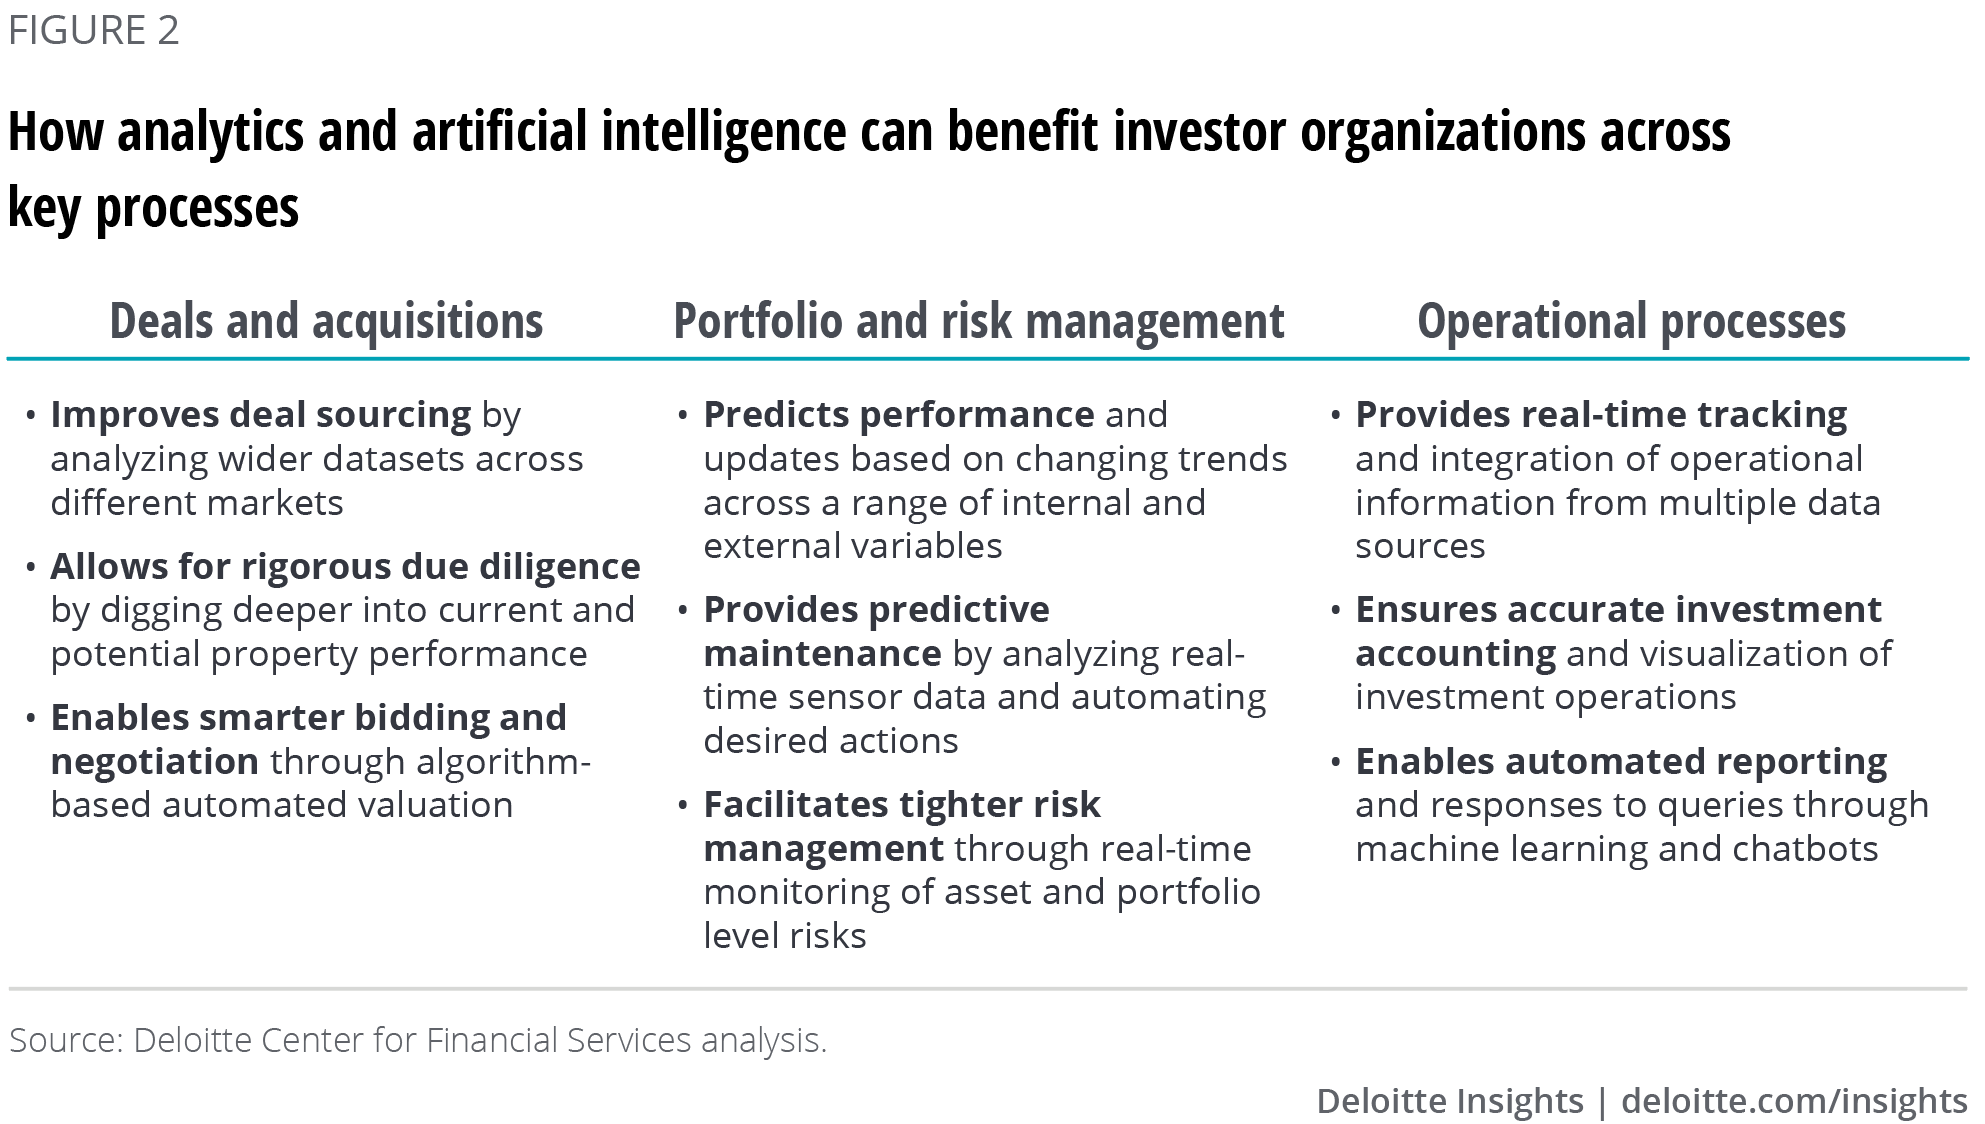 How analytics and artificial intelligence can benefit investor organizations across key processes